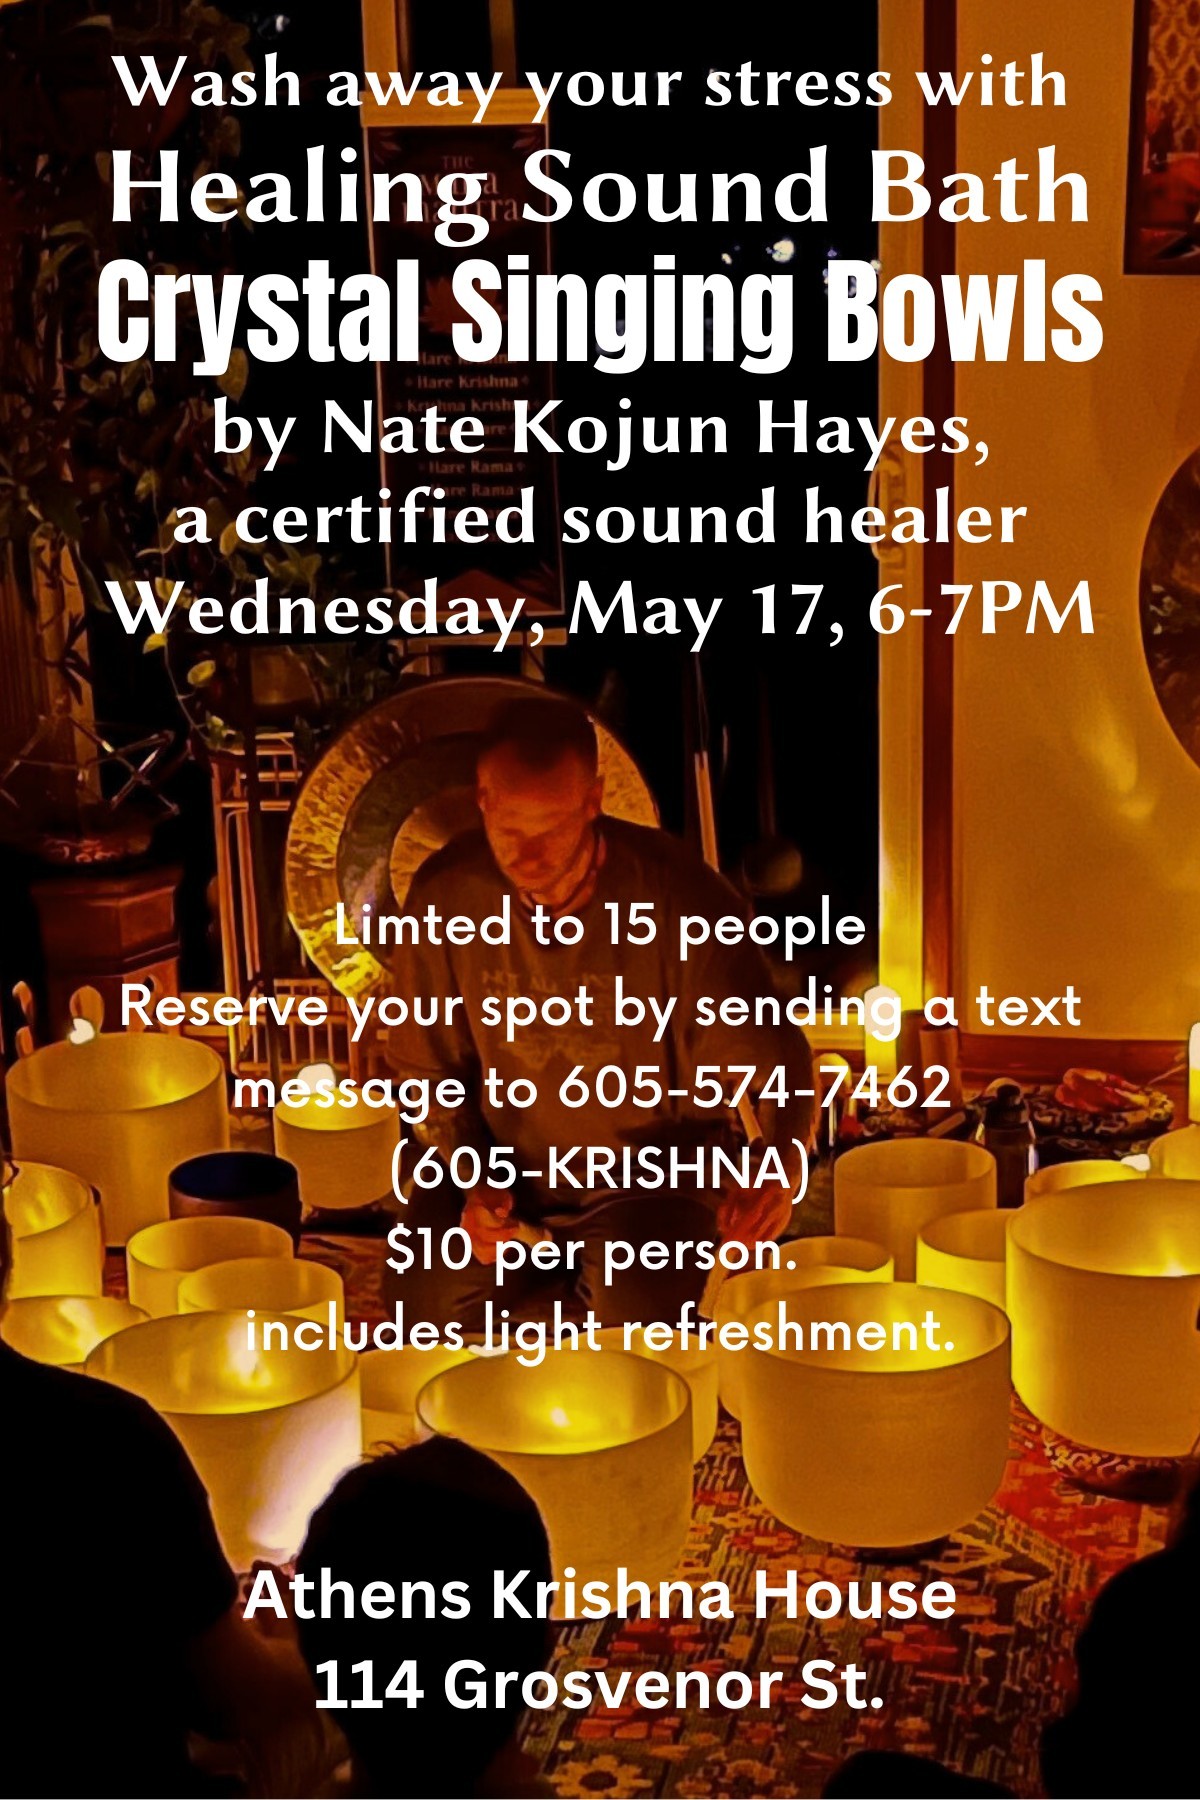 Wash away your stress with Healing Sound Bath Crystal Singing Bowls by Nate Kojun Hayes, a certified sound healer Wednesday, May 17, 6-7 p.m.  Limited to 15 people Reserve your spot by sending a text message to 605-574-7462 (KRISHNA) $10 per person (includes light refreshment) Athens Krishna House 114 Grosvenor Street 